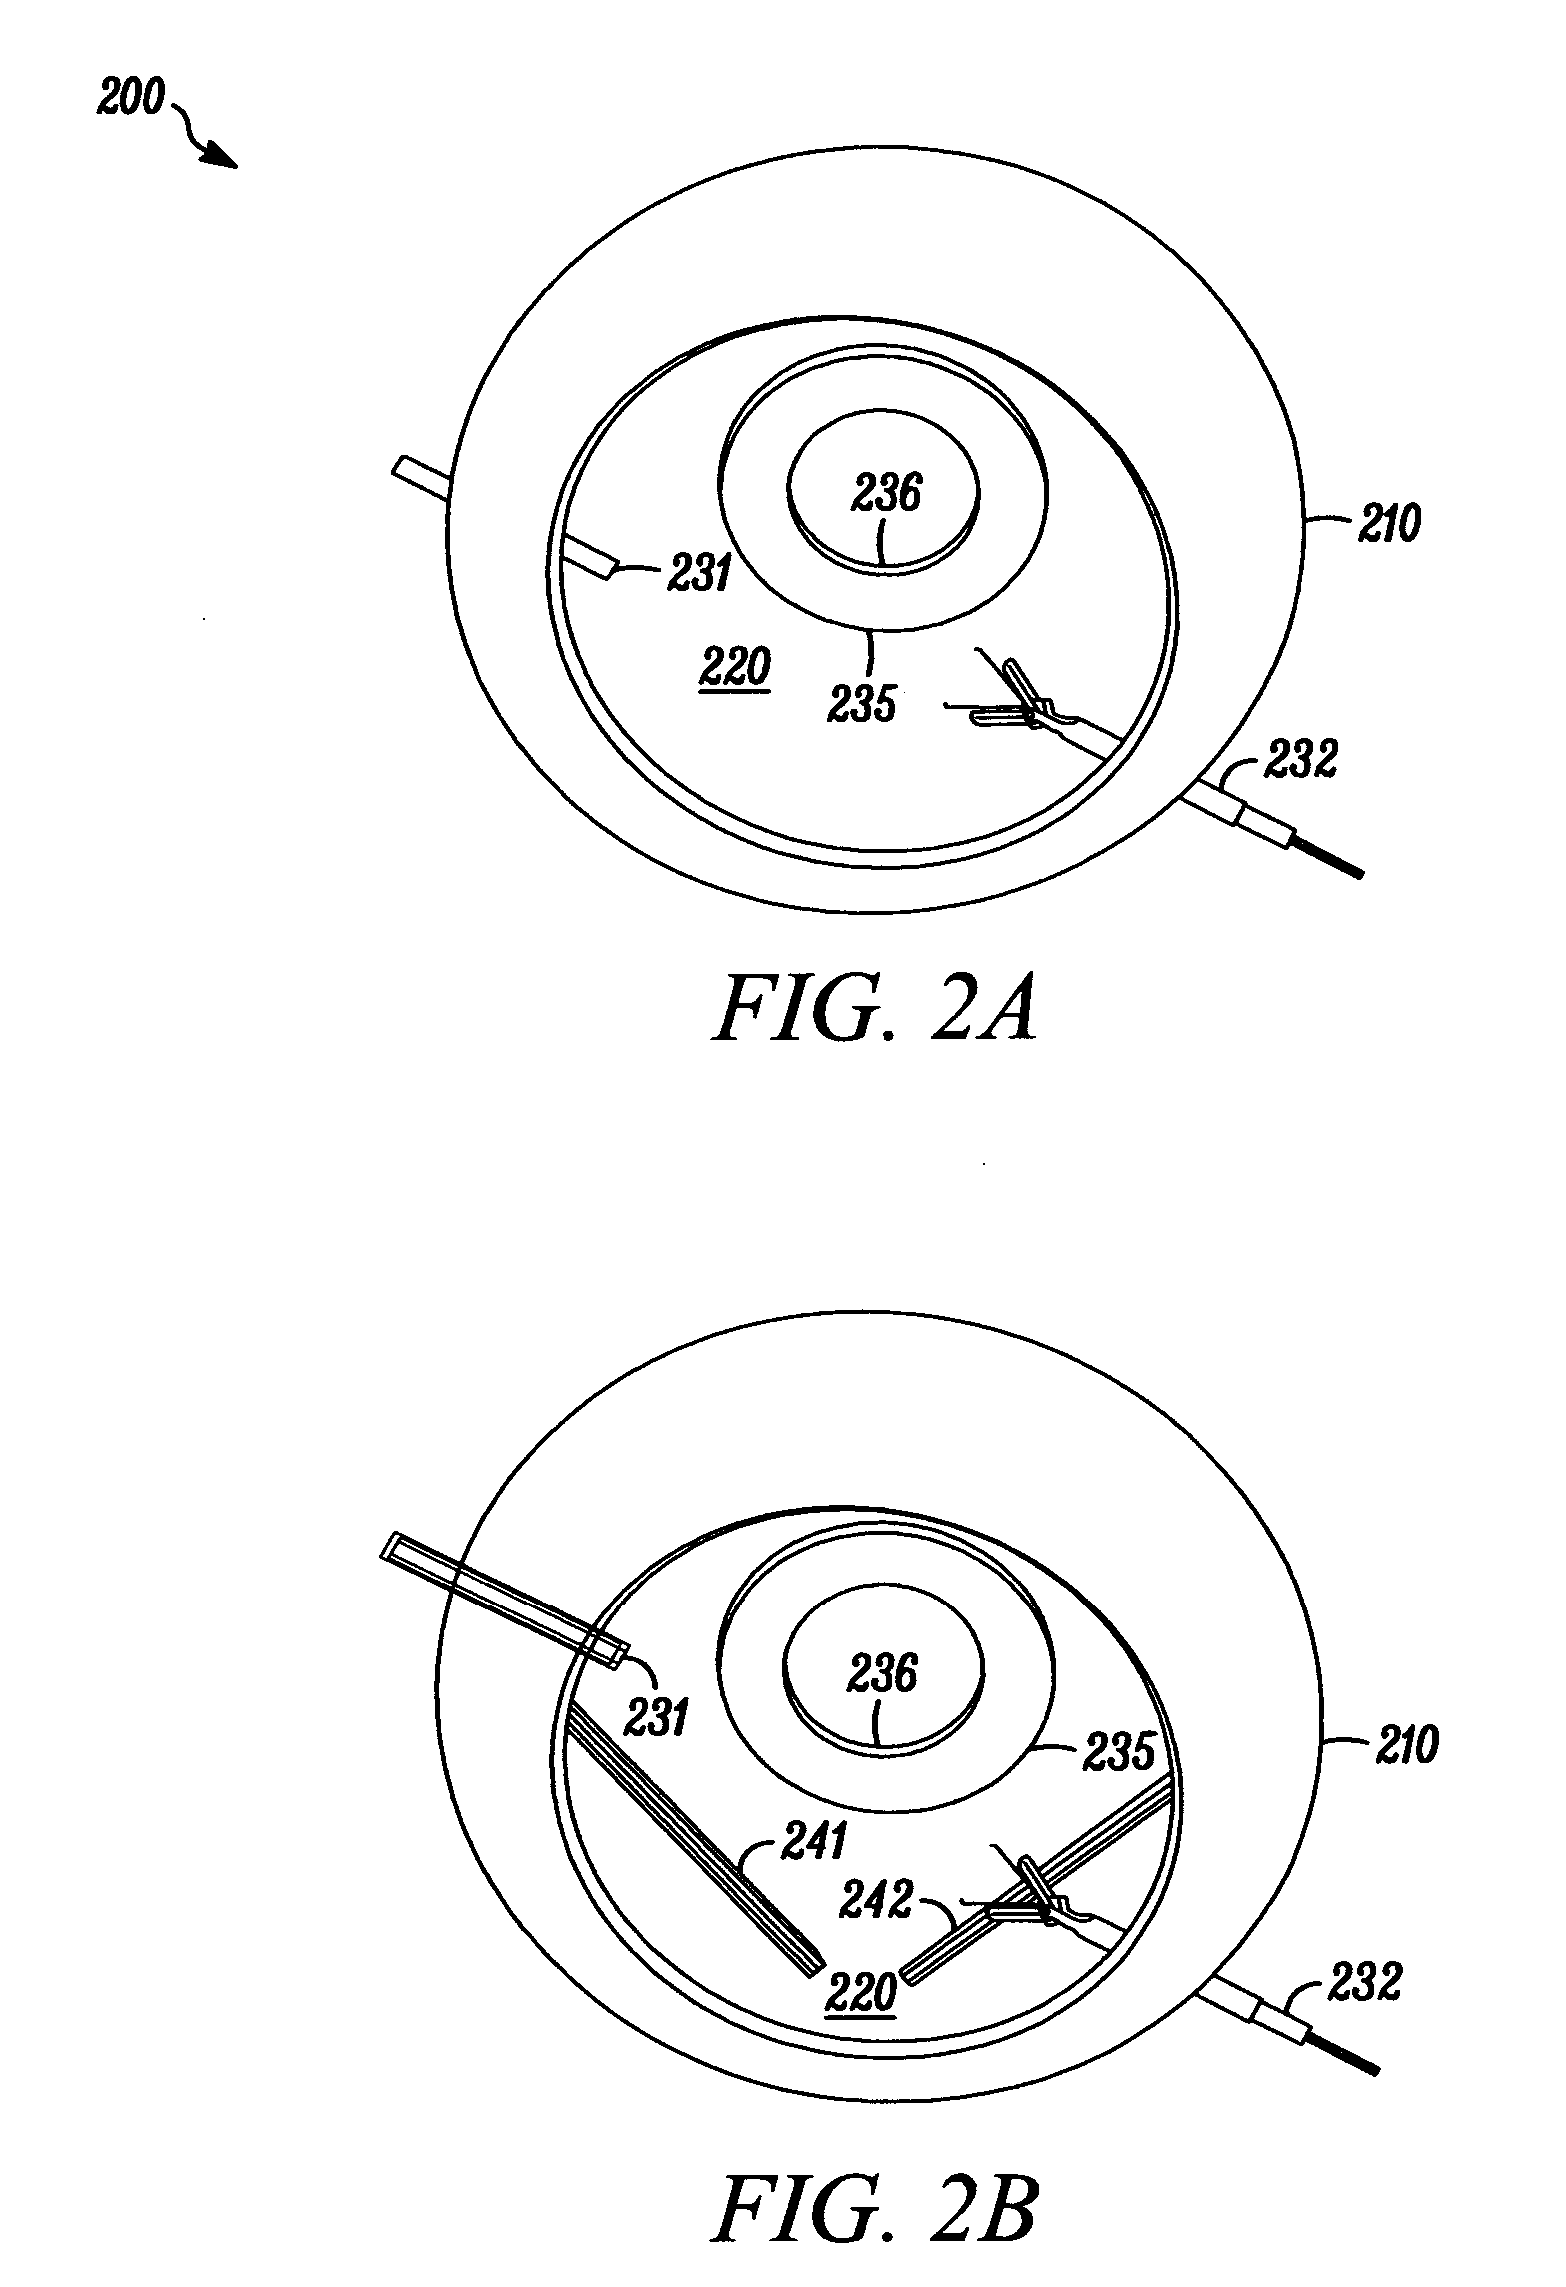 Devices, systems and methods for tissue repair